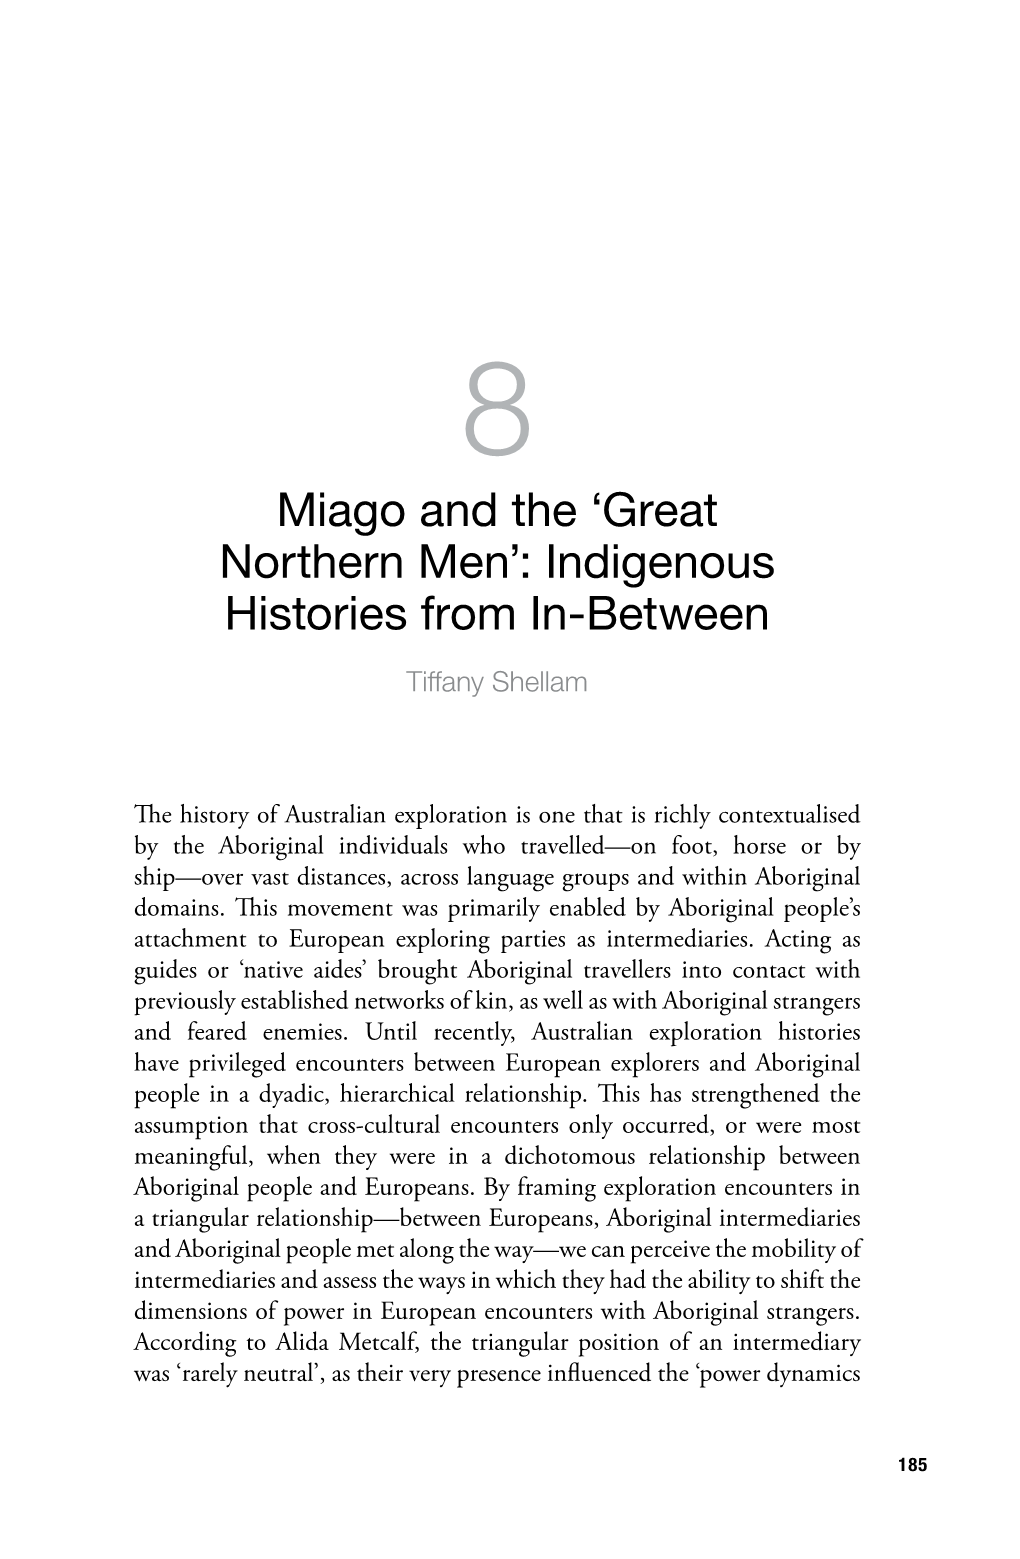 Miago and the 'Great Northern Men': Indigenous Histories from In-Between